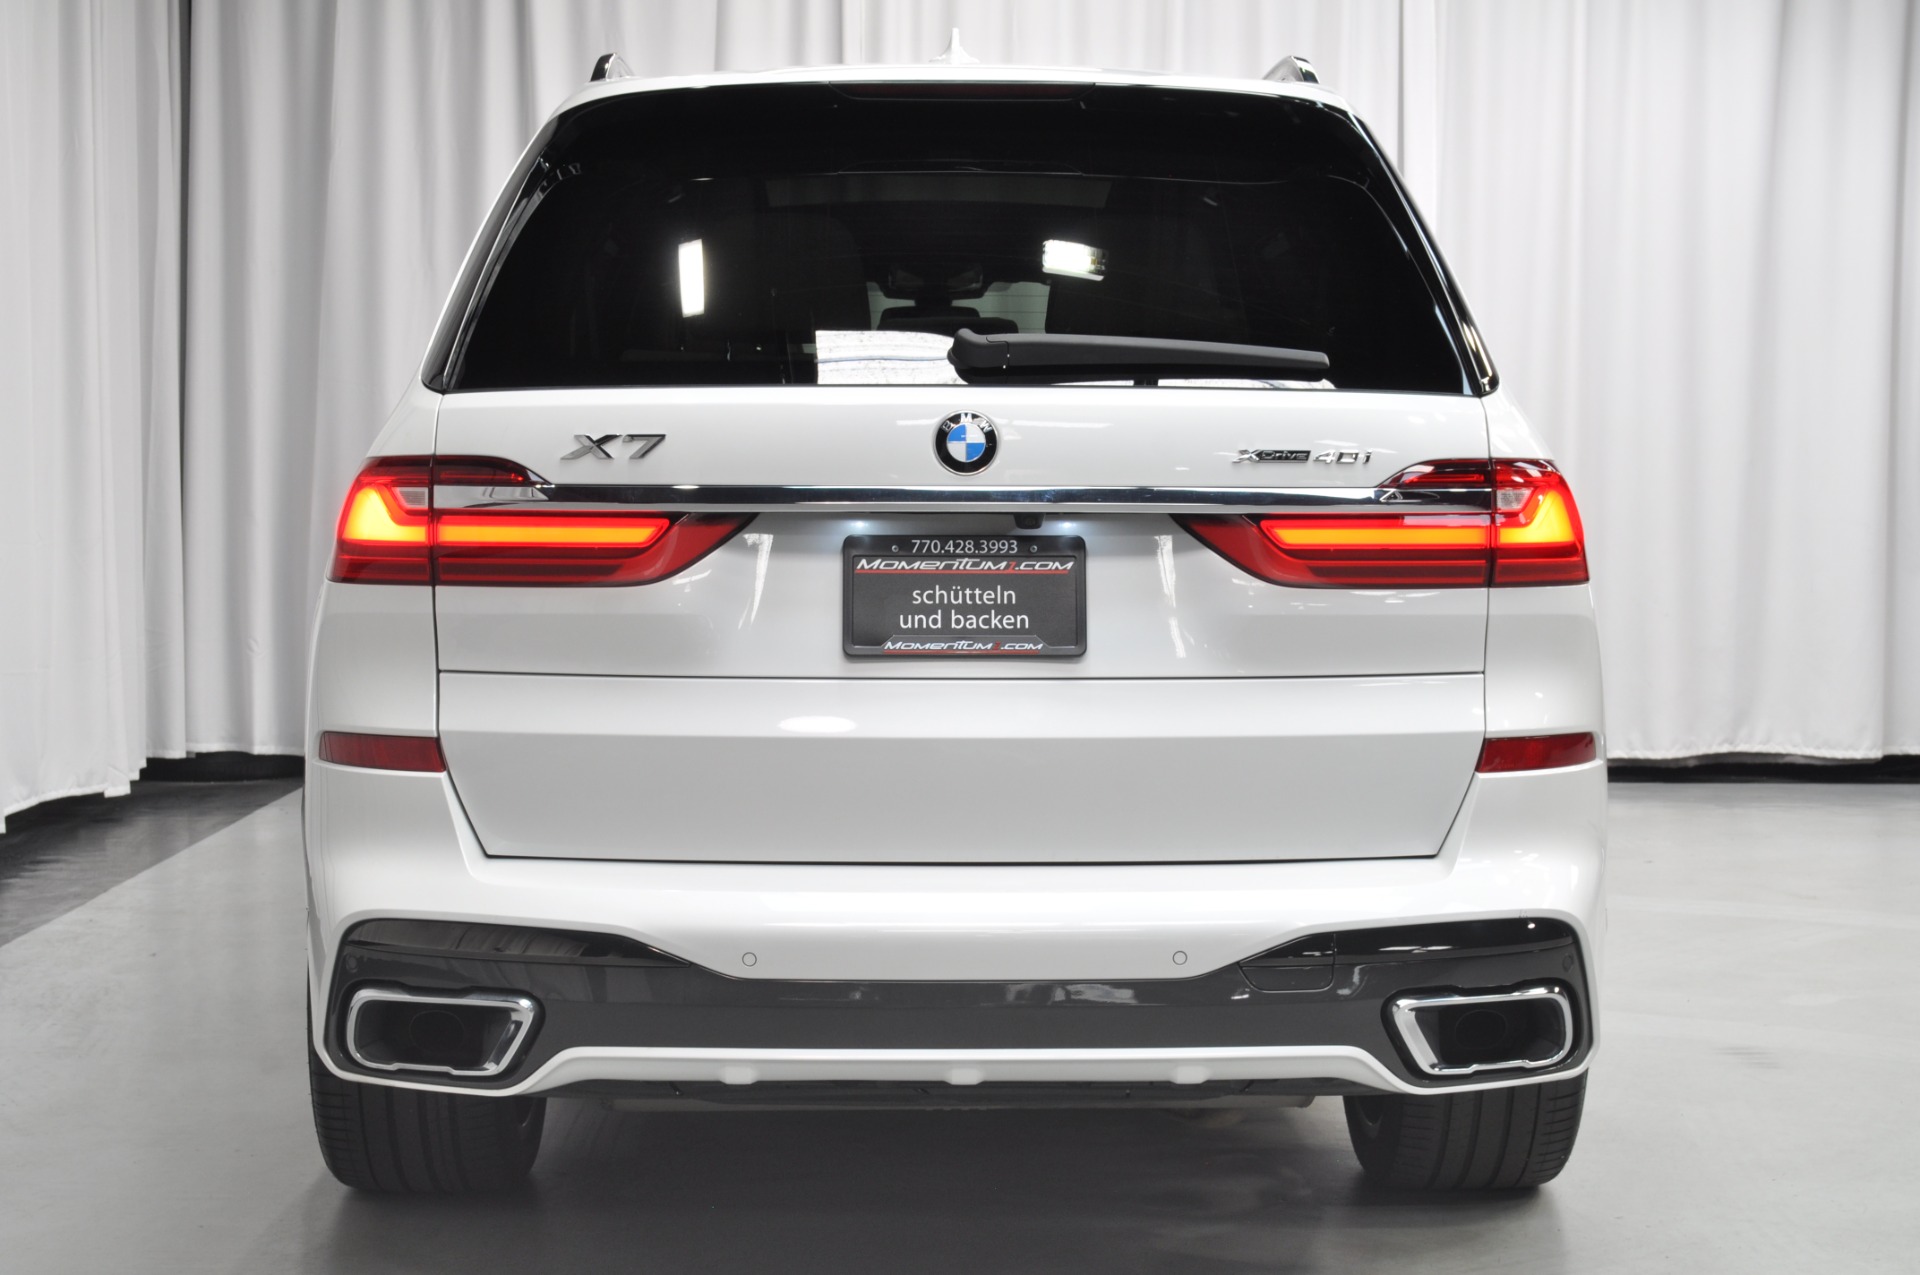 Used 2019 BMW X7 xDrive40i For Sale (Sold)